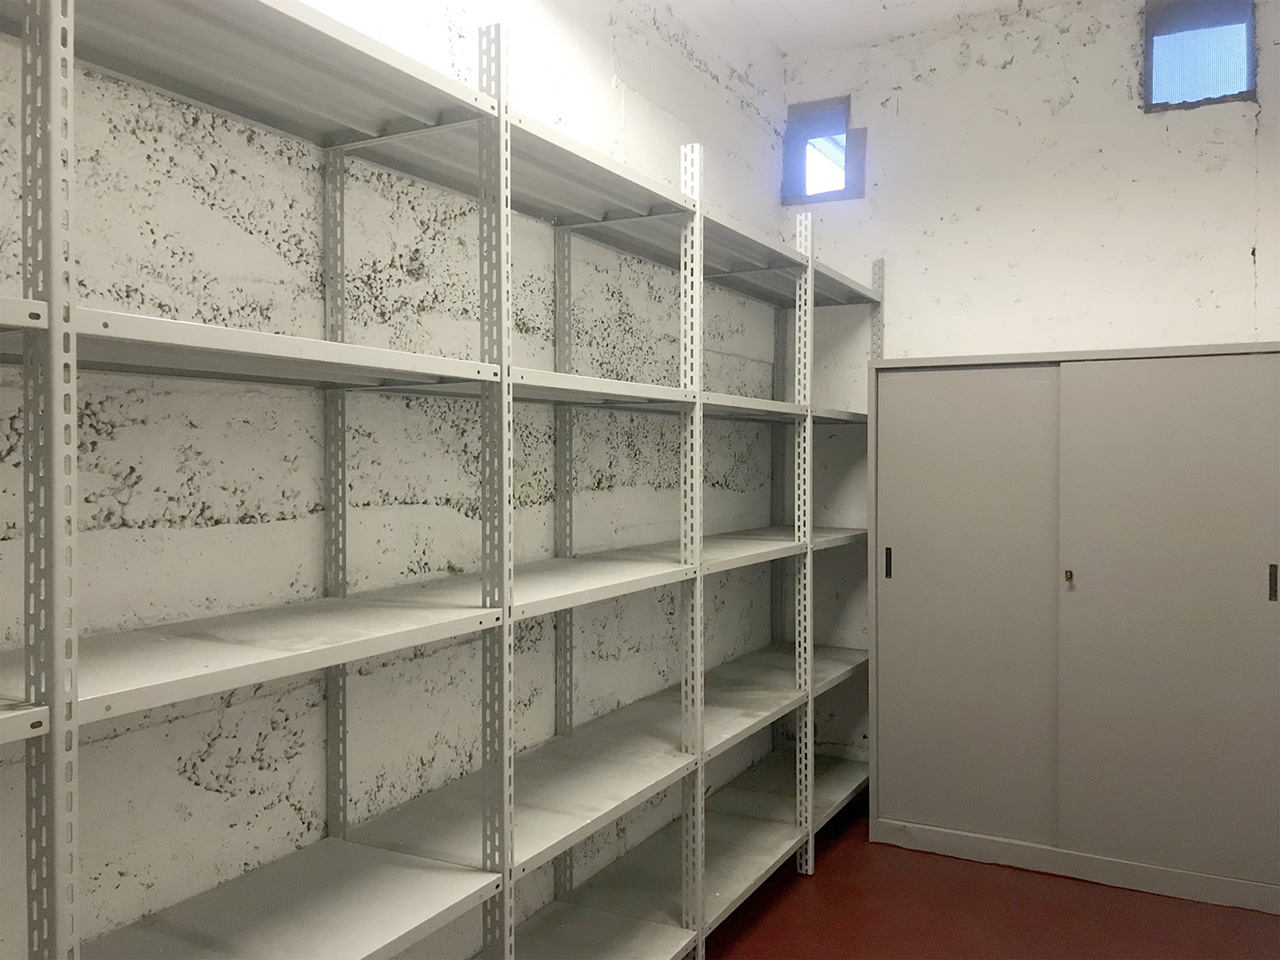 Archive for rent in Milan - 12 sq m (129 sq ft) - Atlantic Business Center